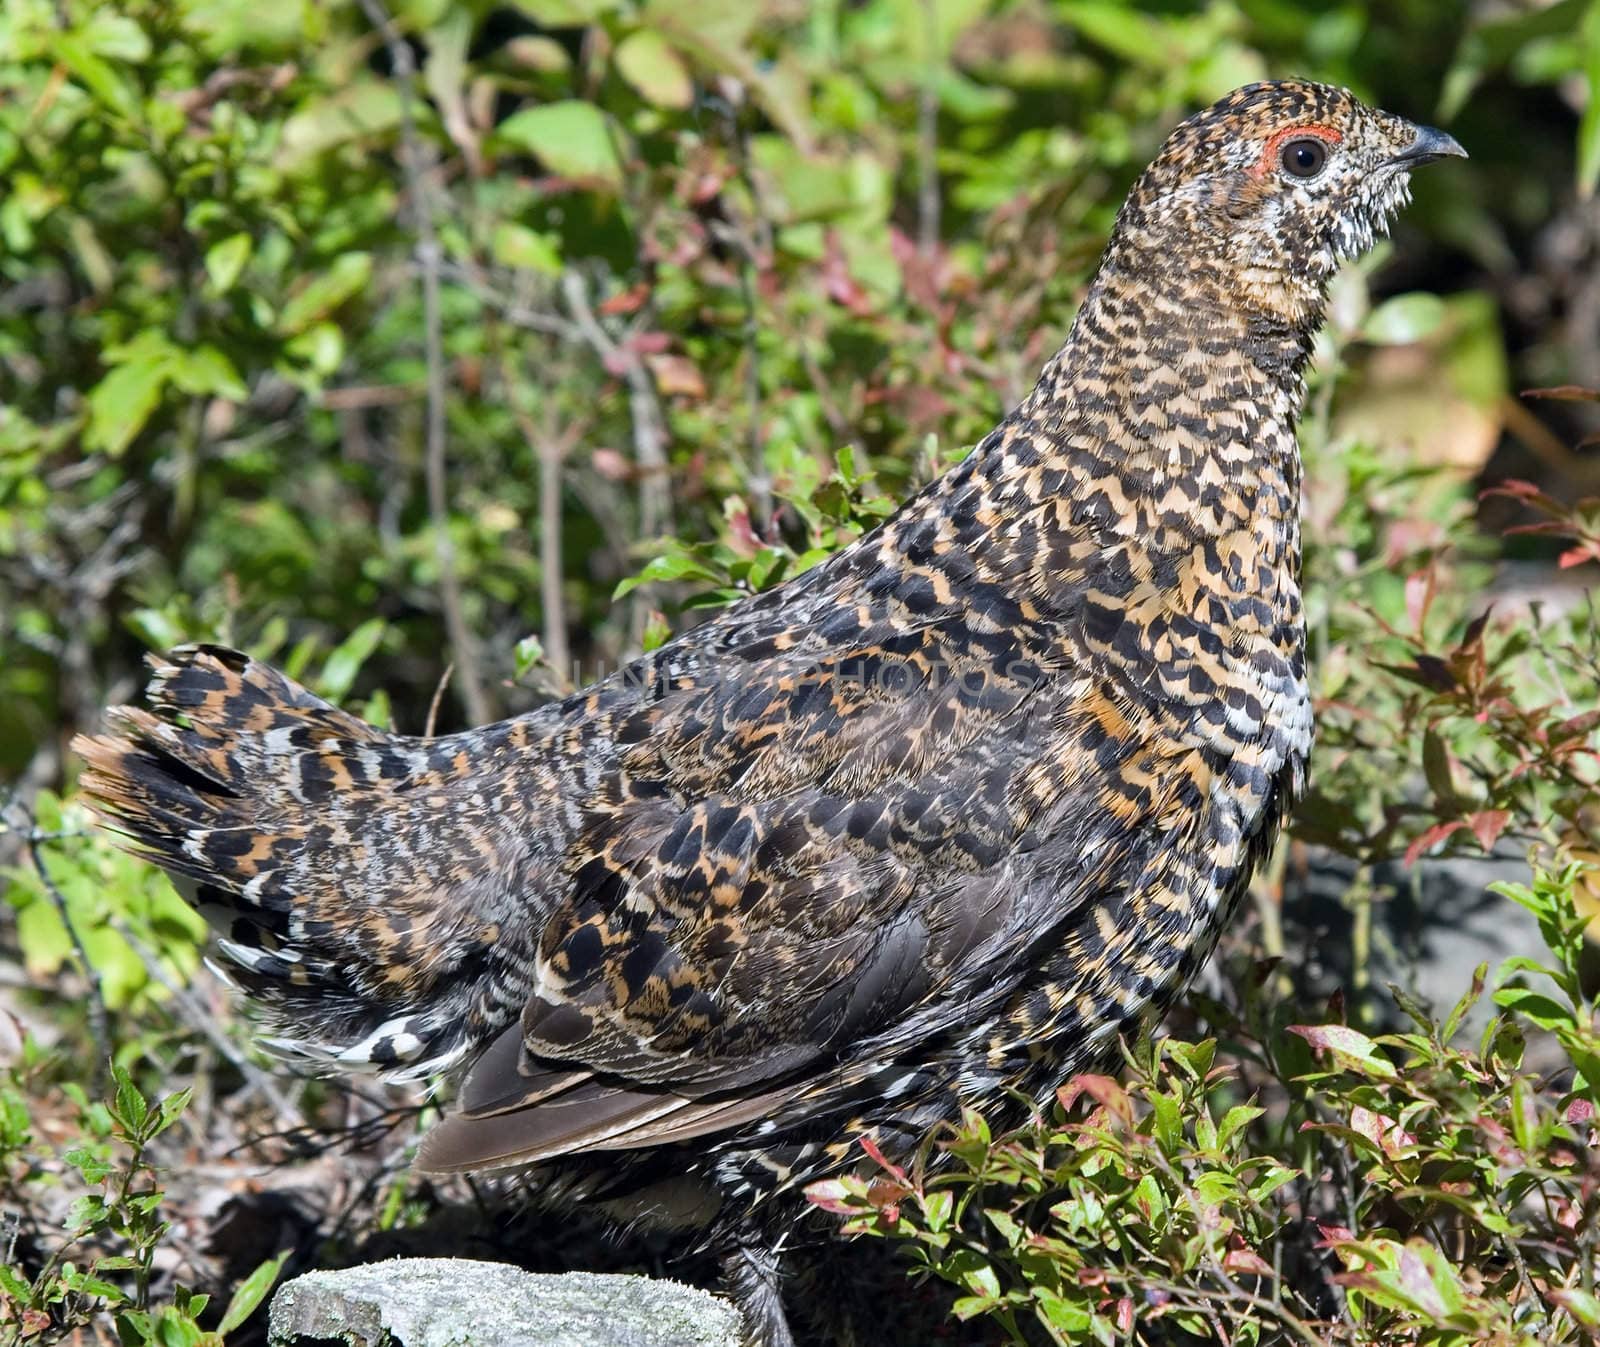 Spruce Grouse (Falcipennis canadensis) by nialat